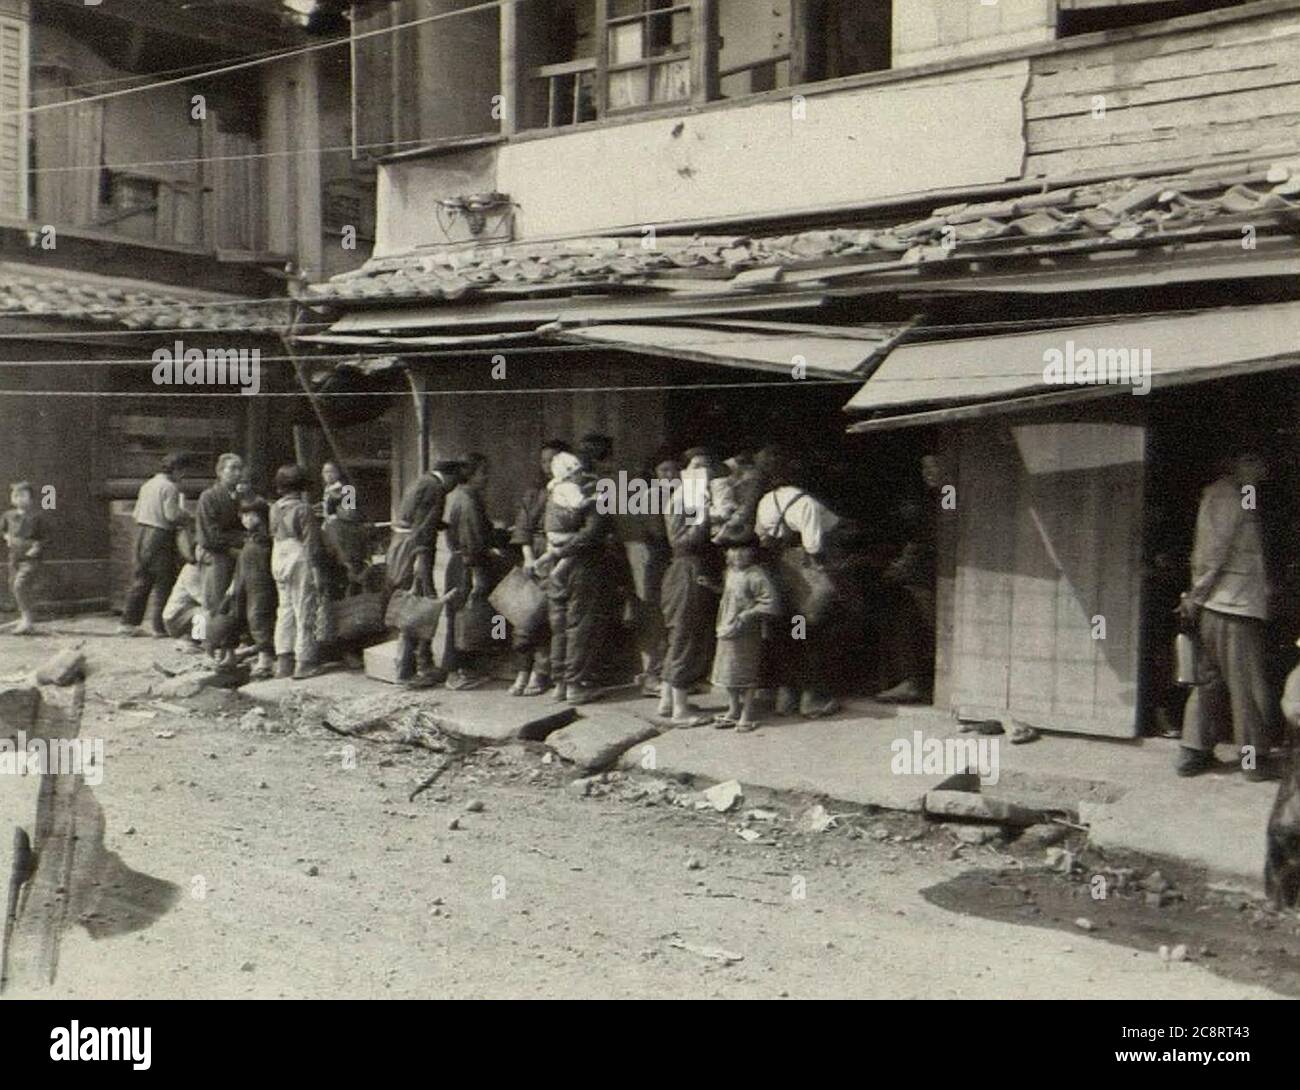 Scene in the city of Hiroshima, Japan after the Atomic Bomb attack - late 1945 or early 1946 Stock Photo